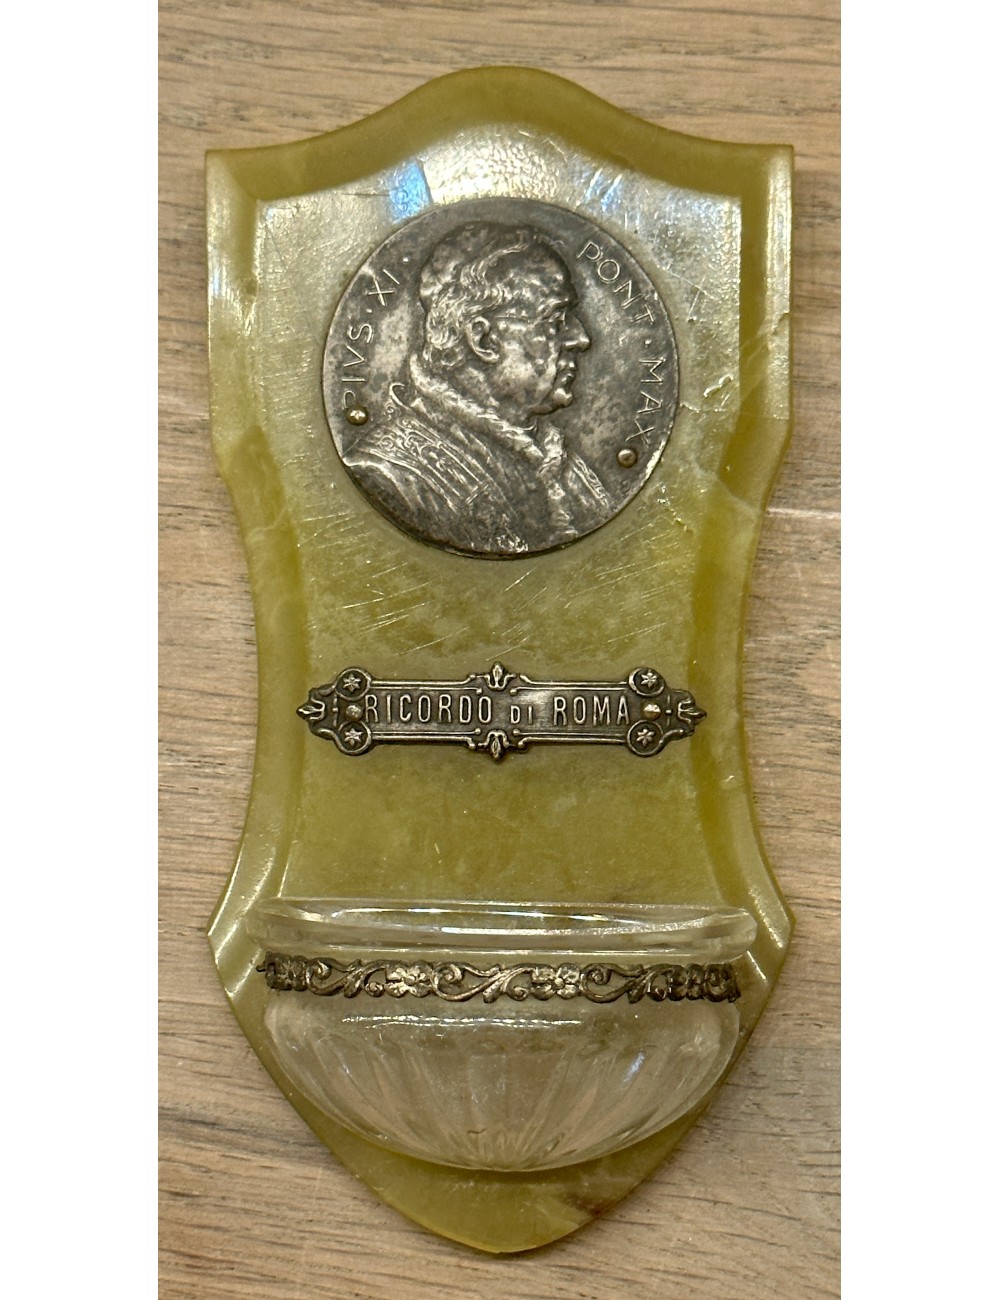 Holy water container - green plastic with a metal plate/image of Pope Pius XI